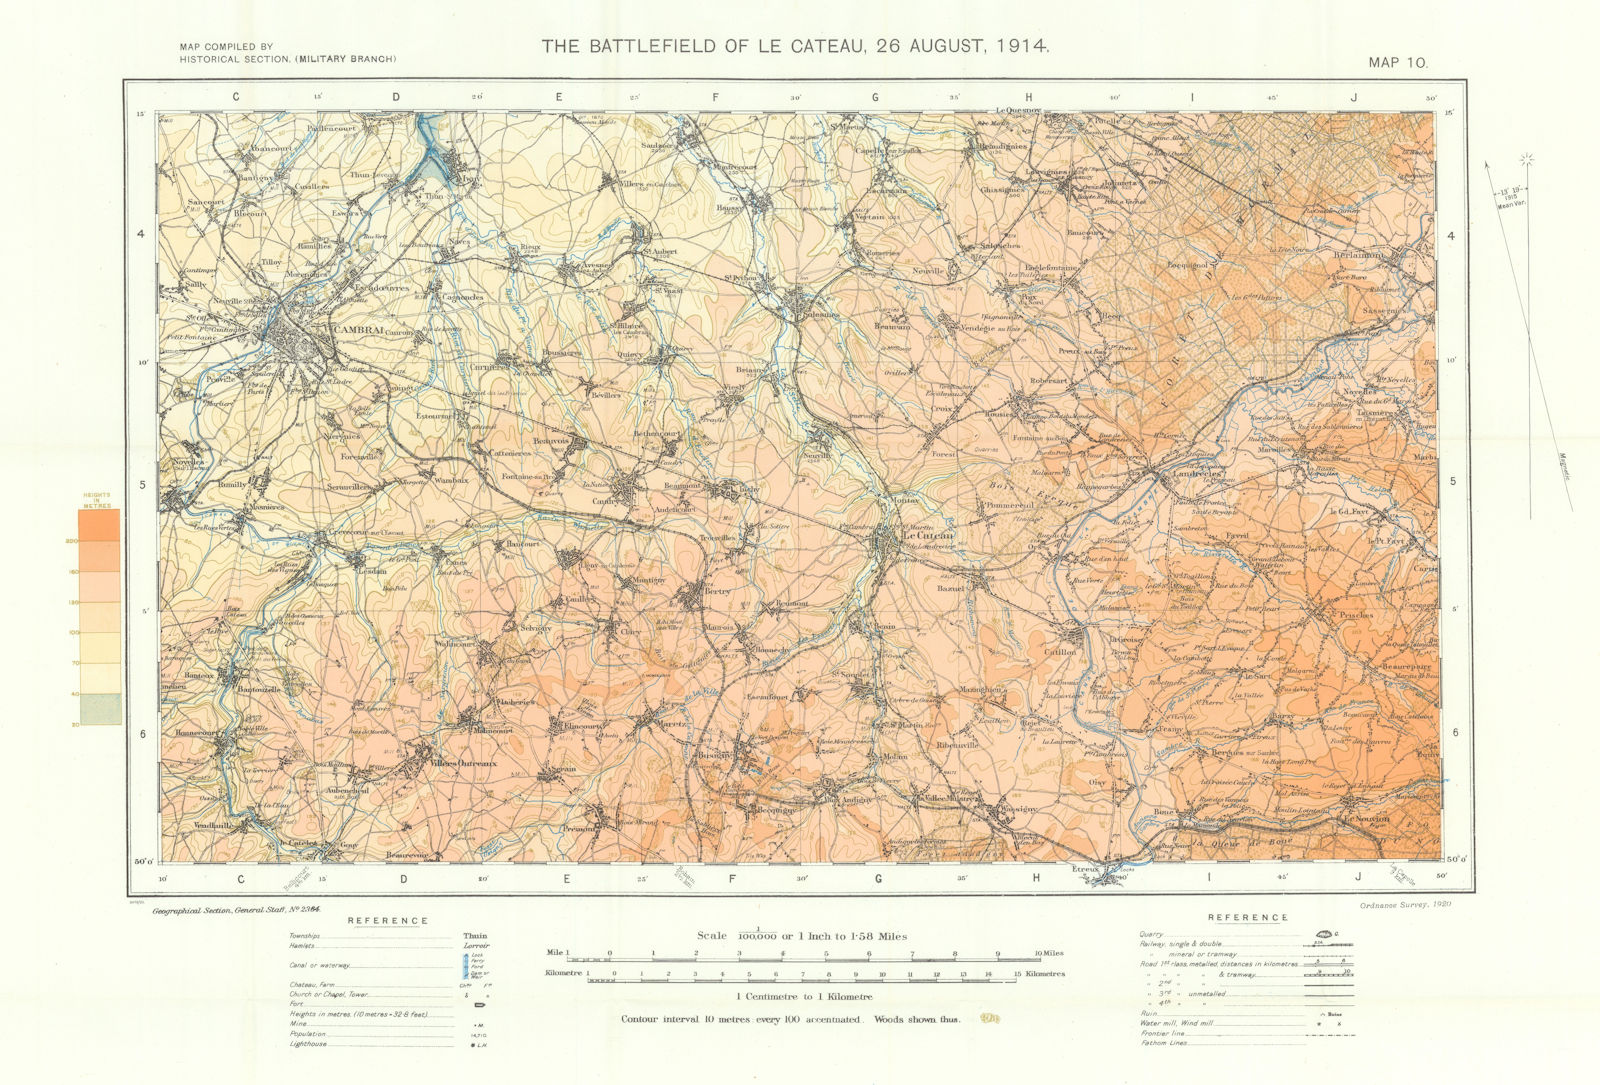 Battlefield of Le Cateau, 26 August, 1914. First World War. 1933 old map